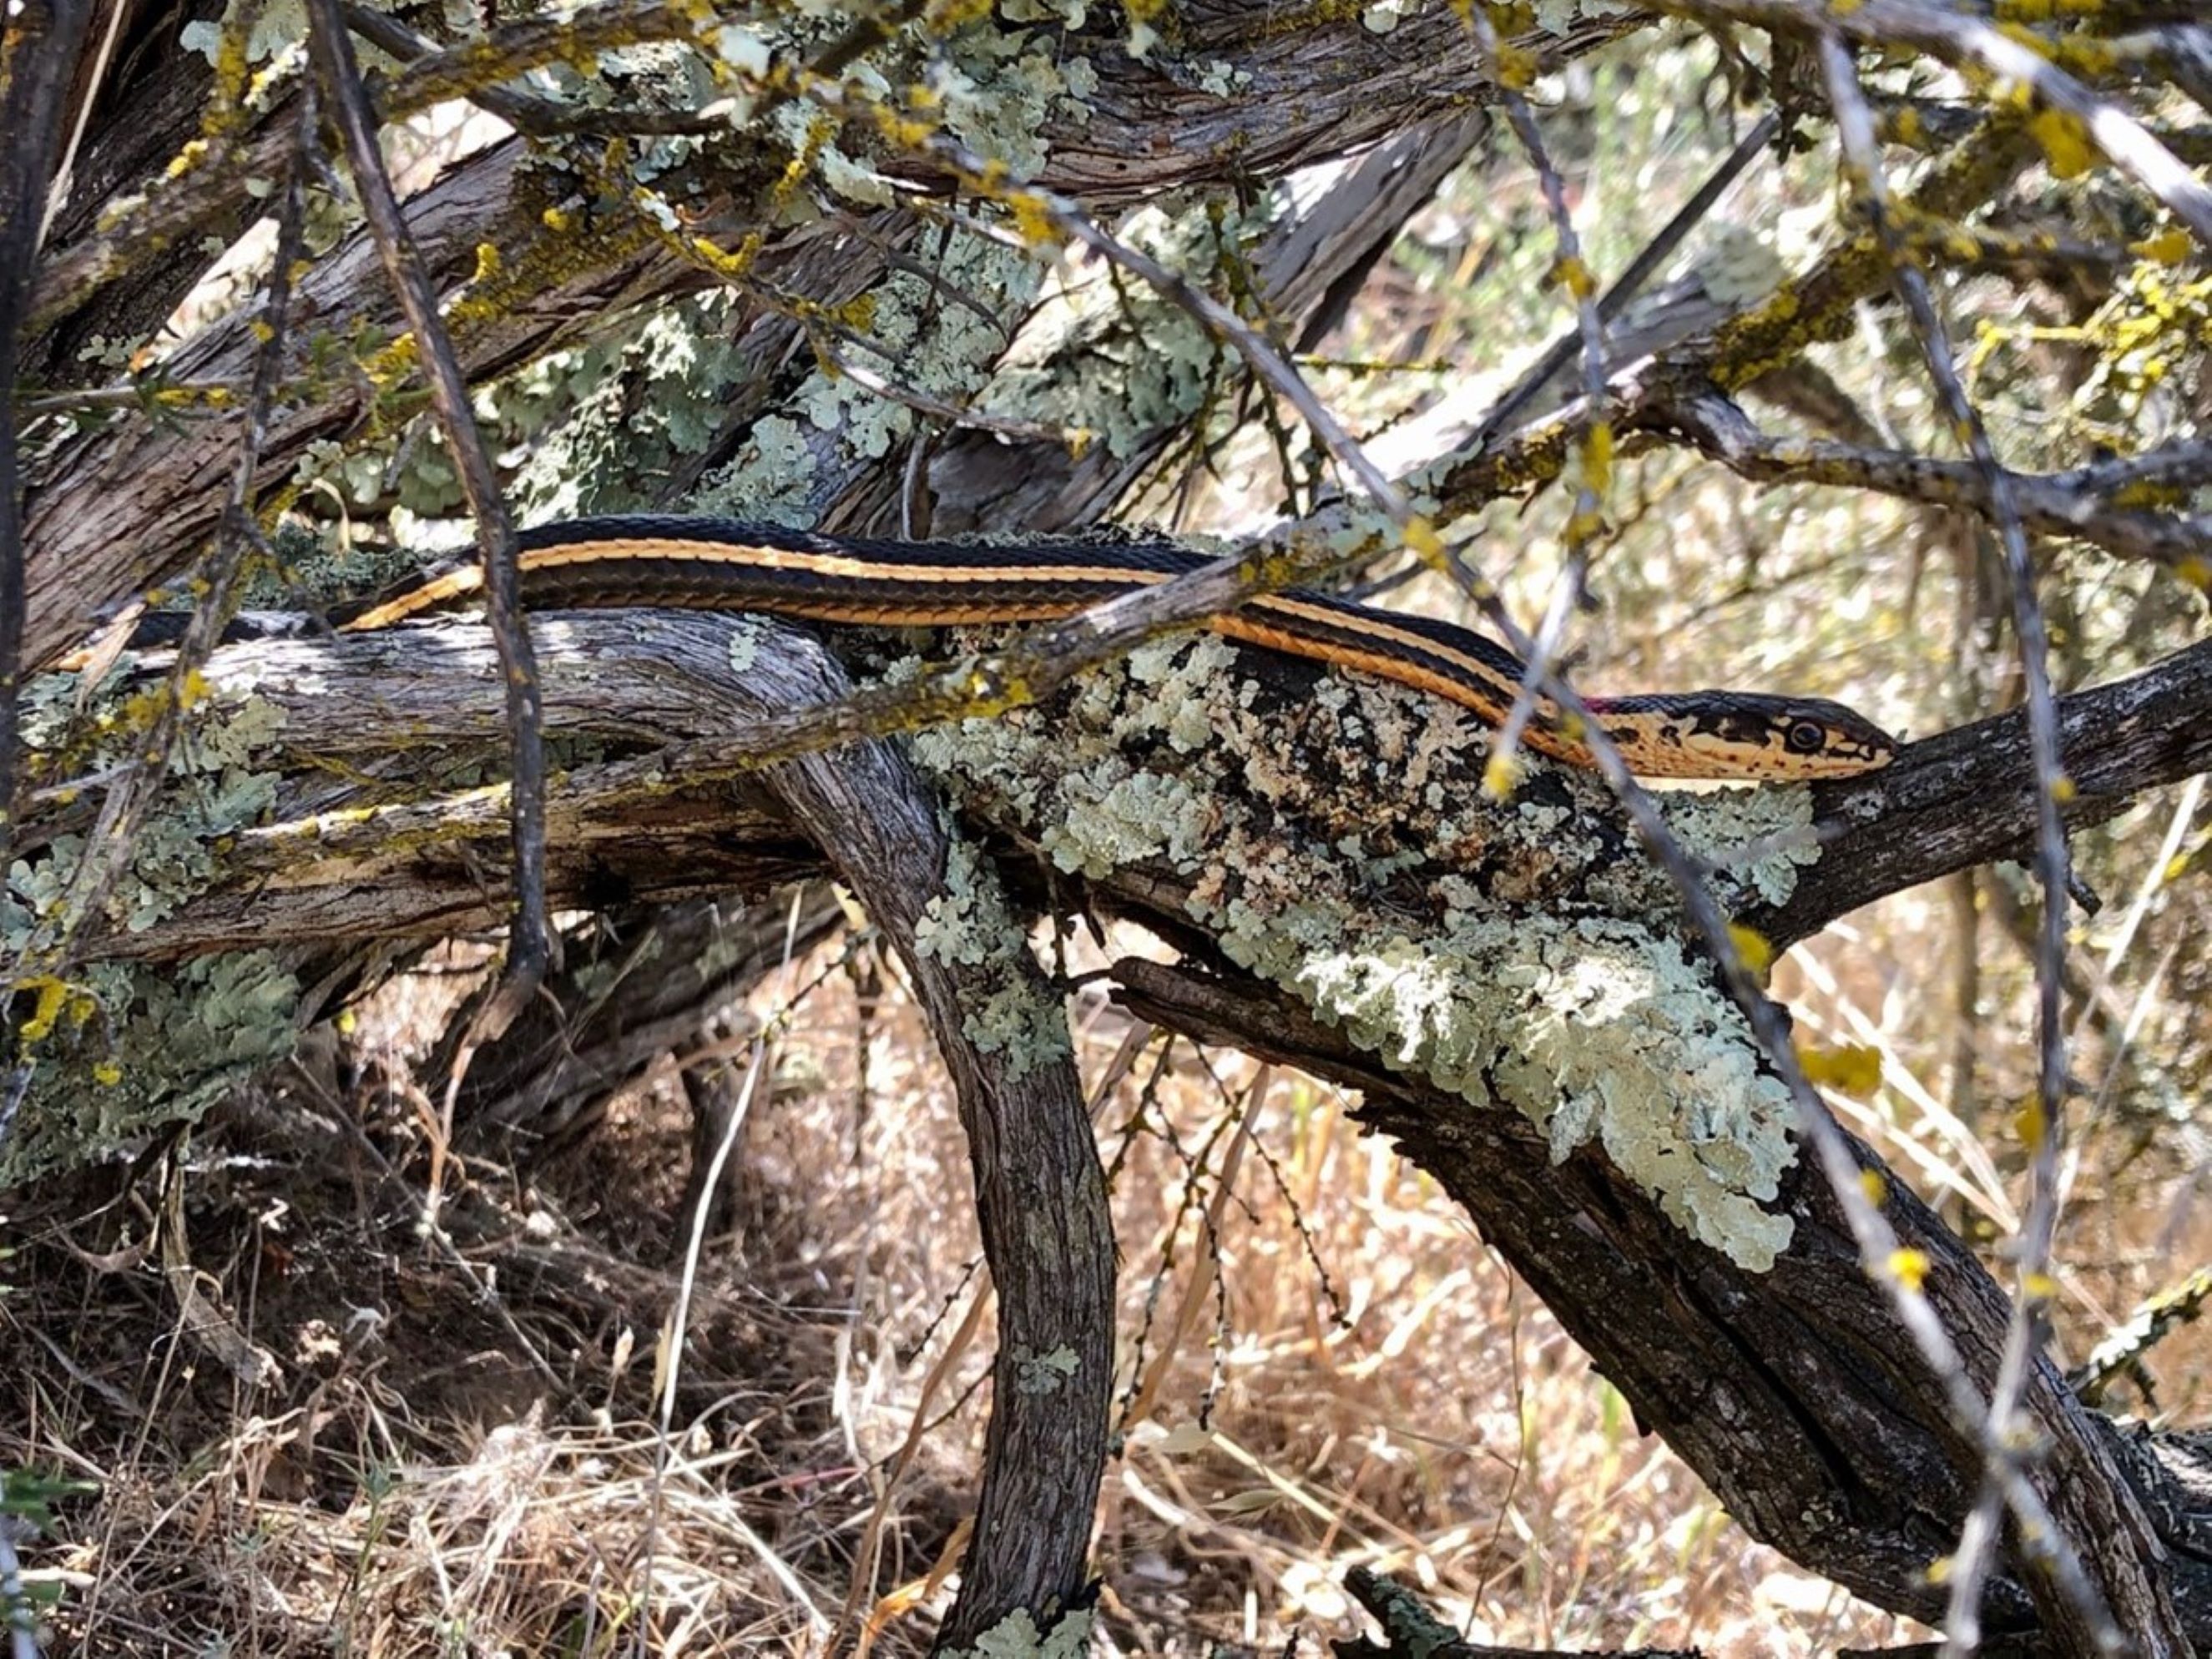 a black and yellow striped snake slithers along a tree branch